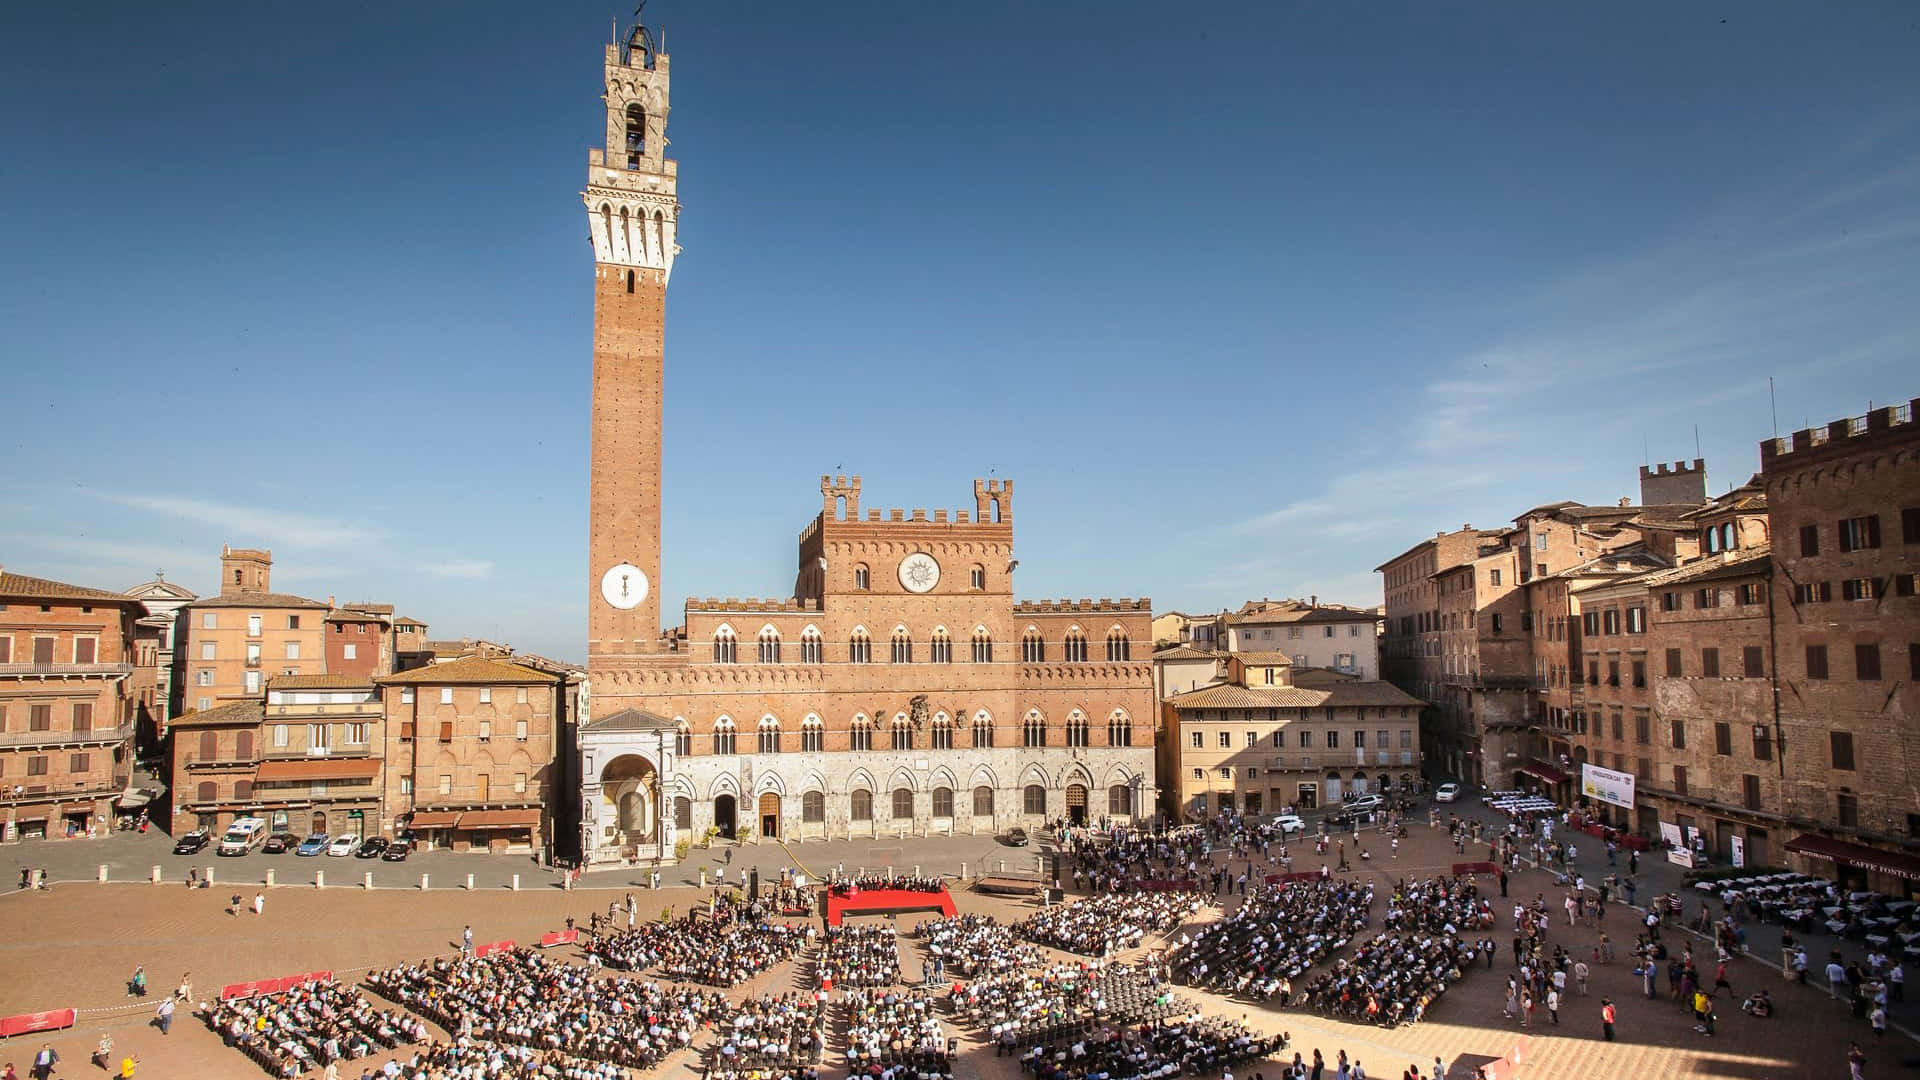 Siena Piazza Del Campo With Tourists Picture